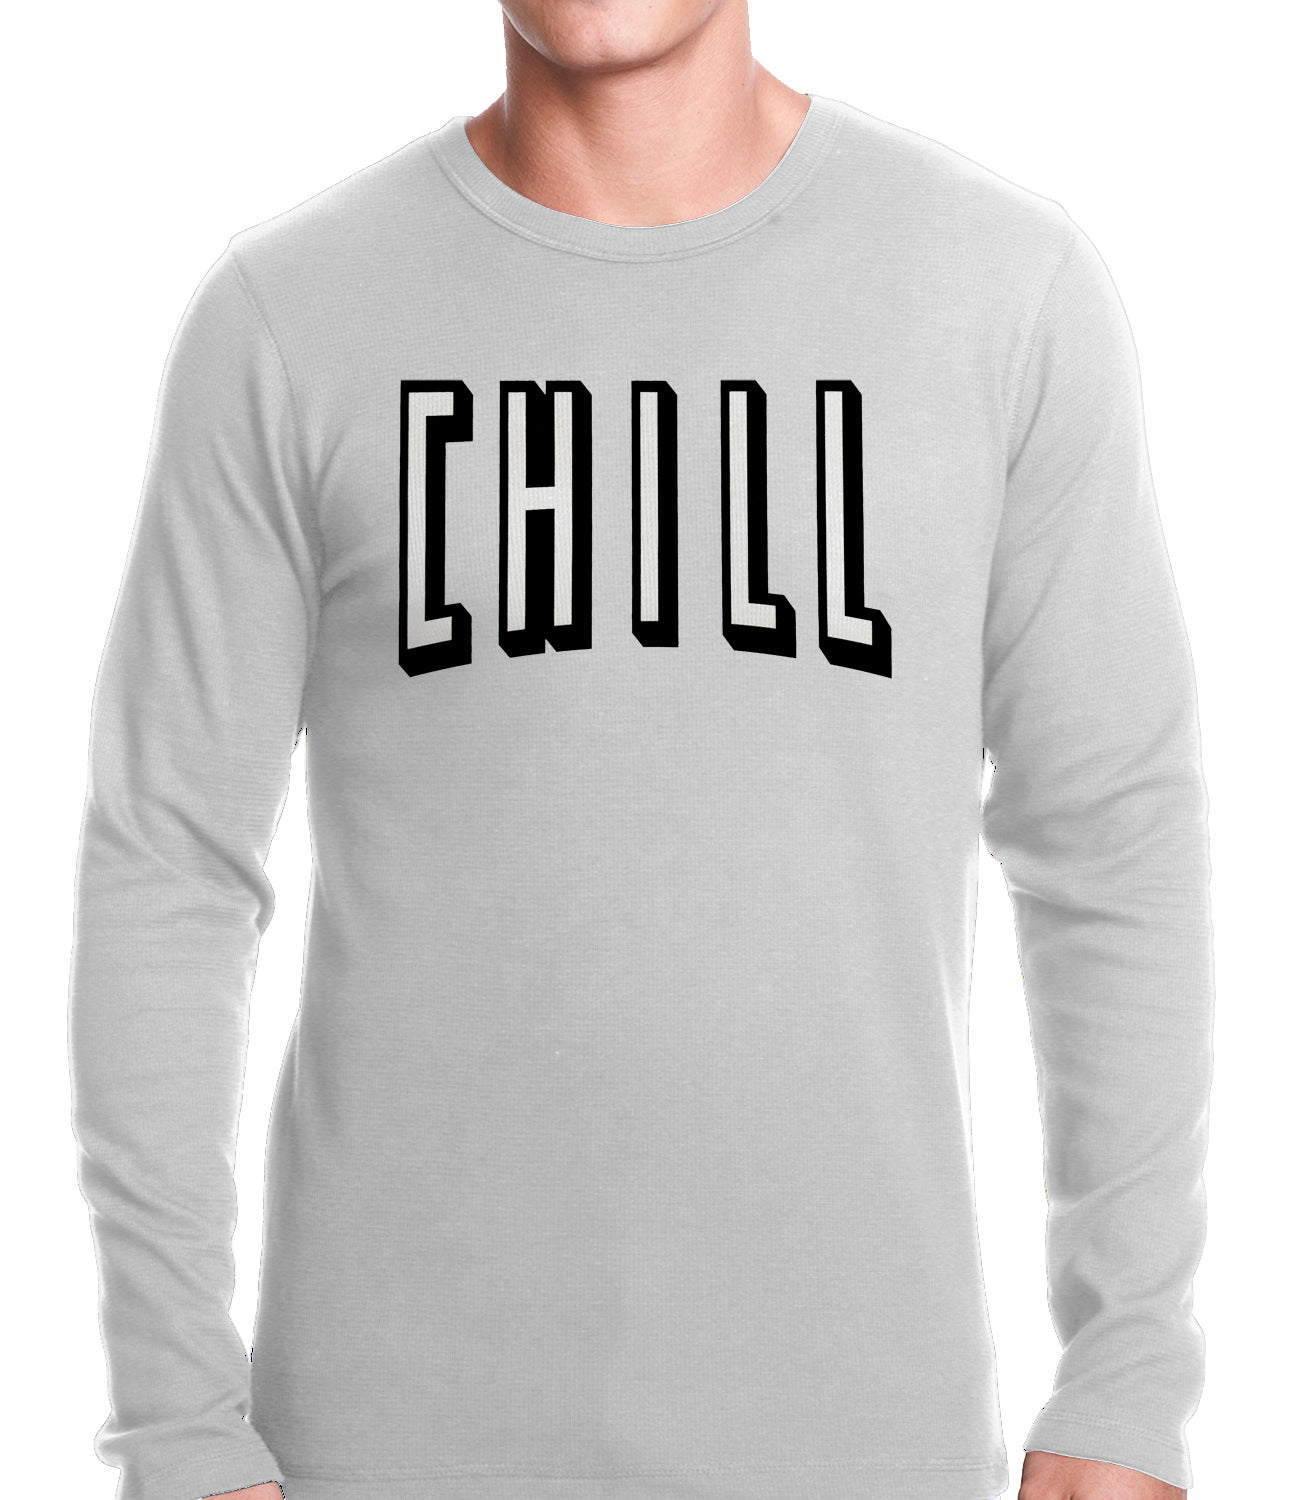 Movie & Chill Funny Hook-up Thermal Shirt